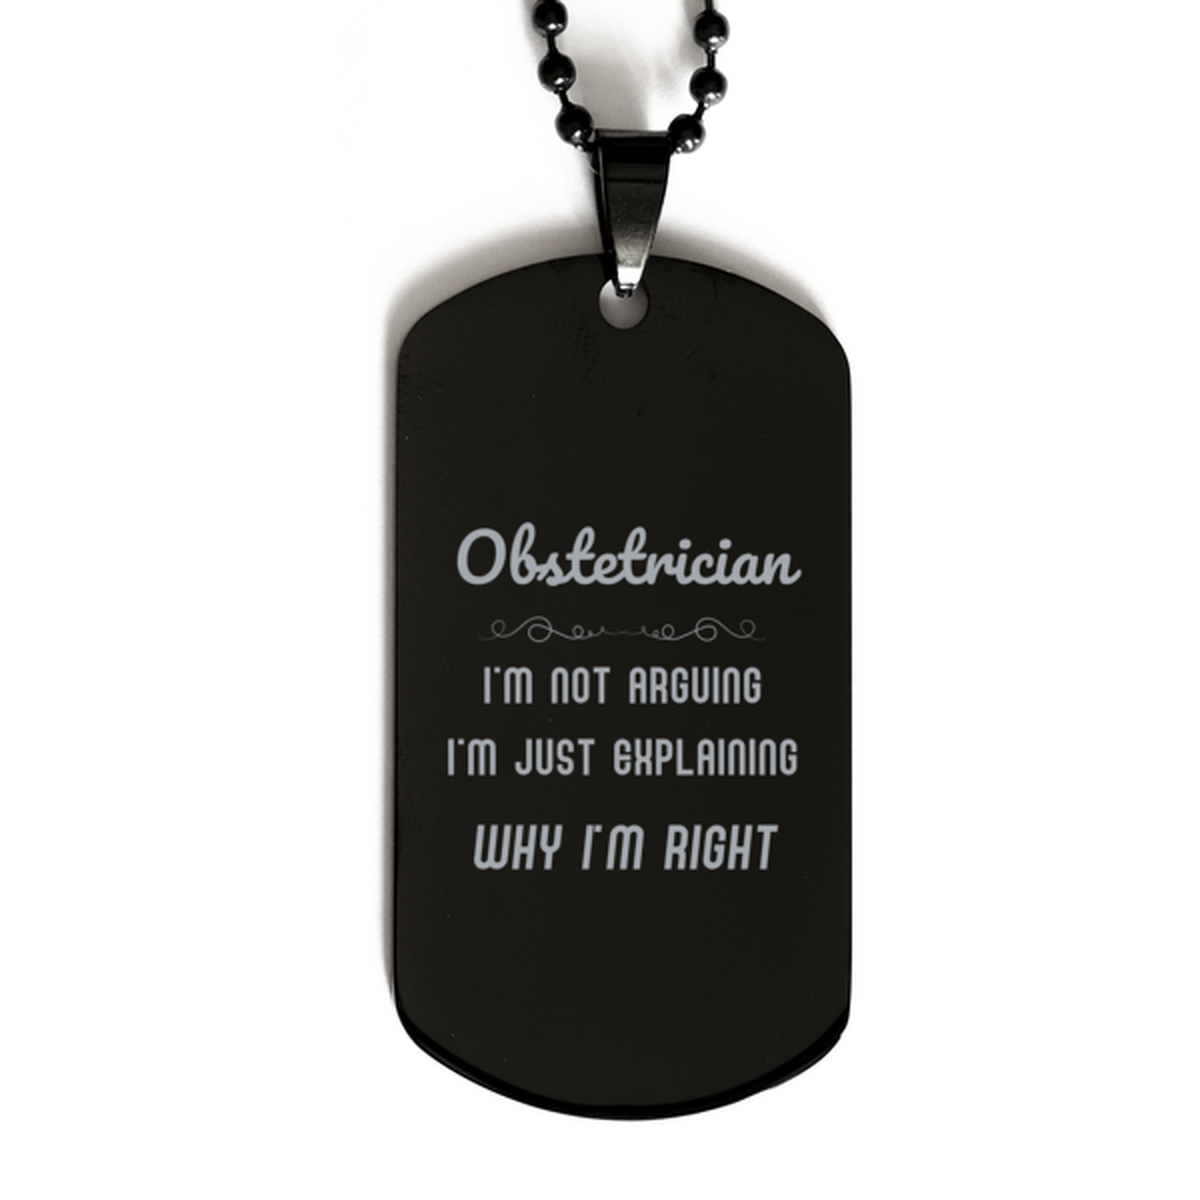 Obstetrician I'm not Arguing. I'm Just Explaining Why I'm RIGHT Black Dog Tag, Funny Saying Quote Obstetrician Gifts For Obstetrician Graduation Birthday Christmas Gifts for Men Women Coworker